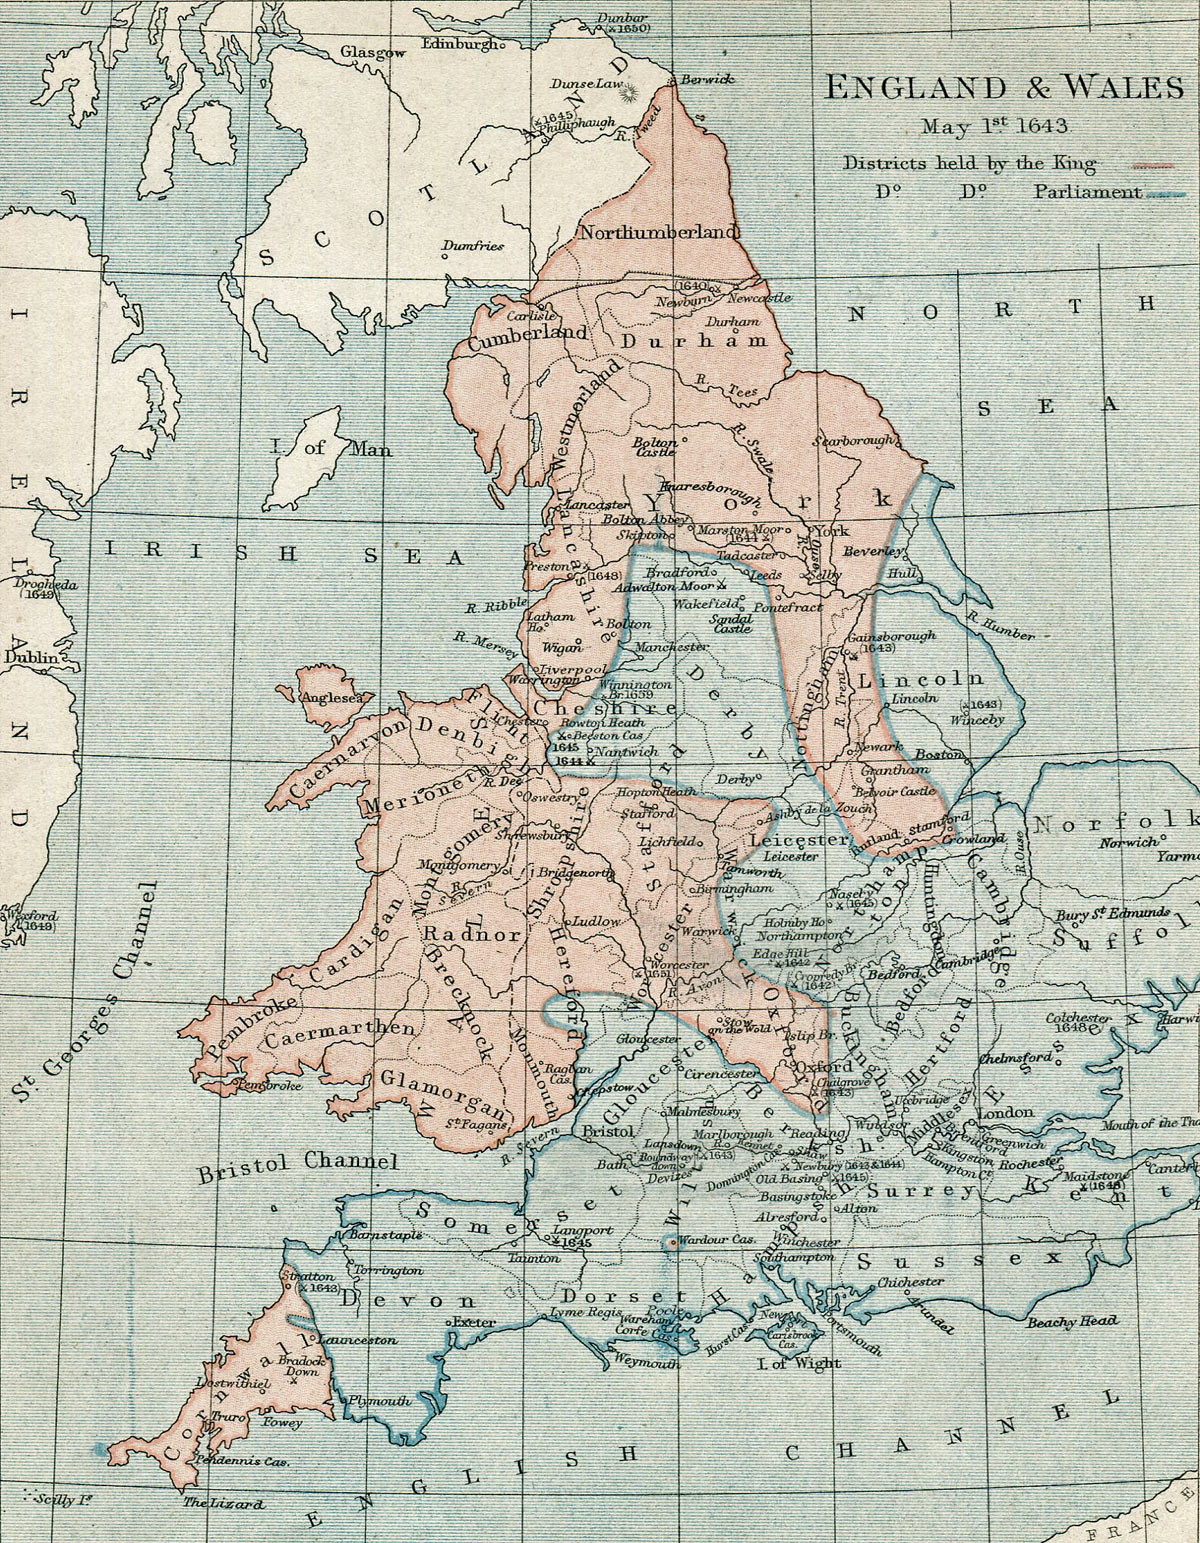 Map of England showing areas occupied by Parliament and the Royalists